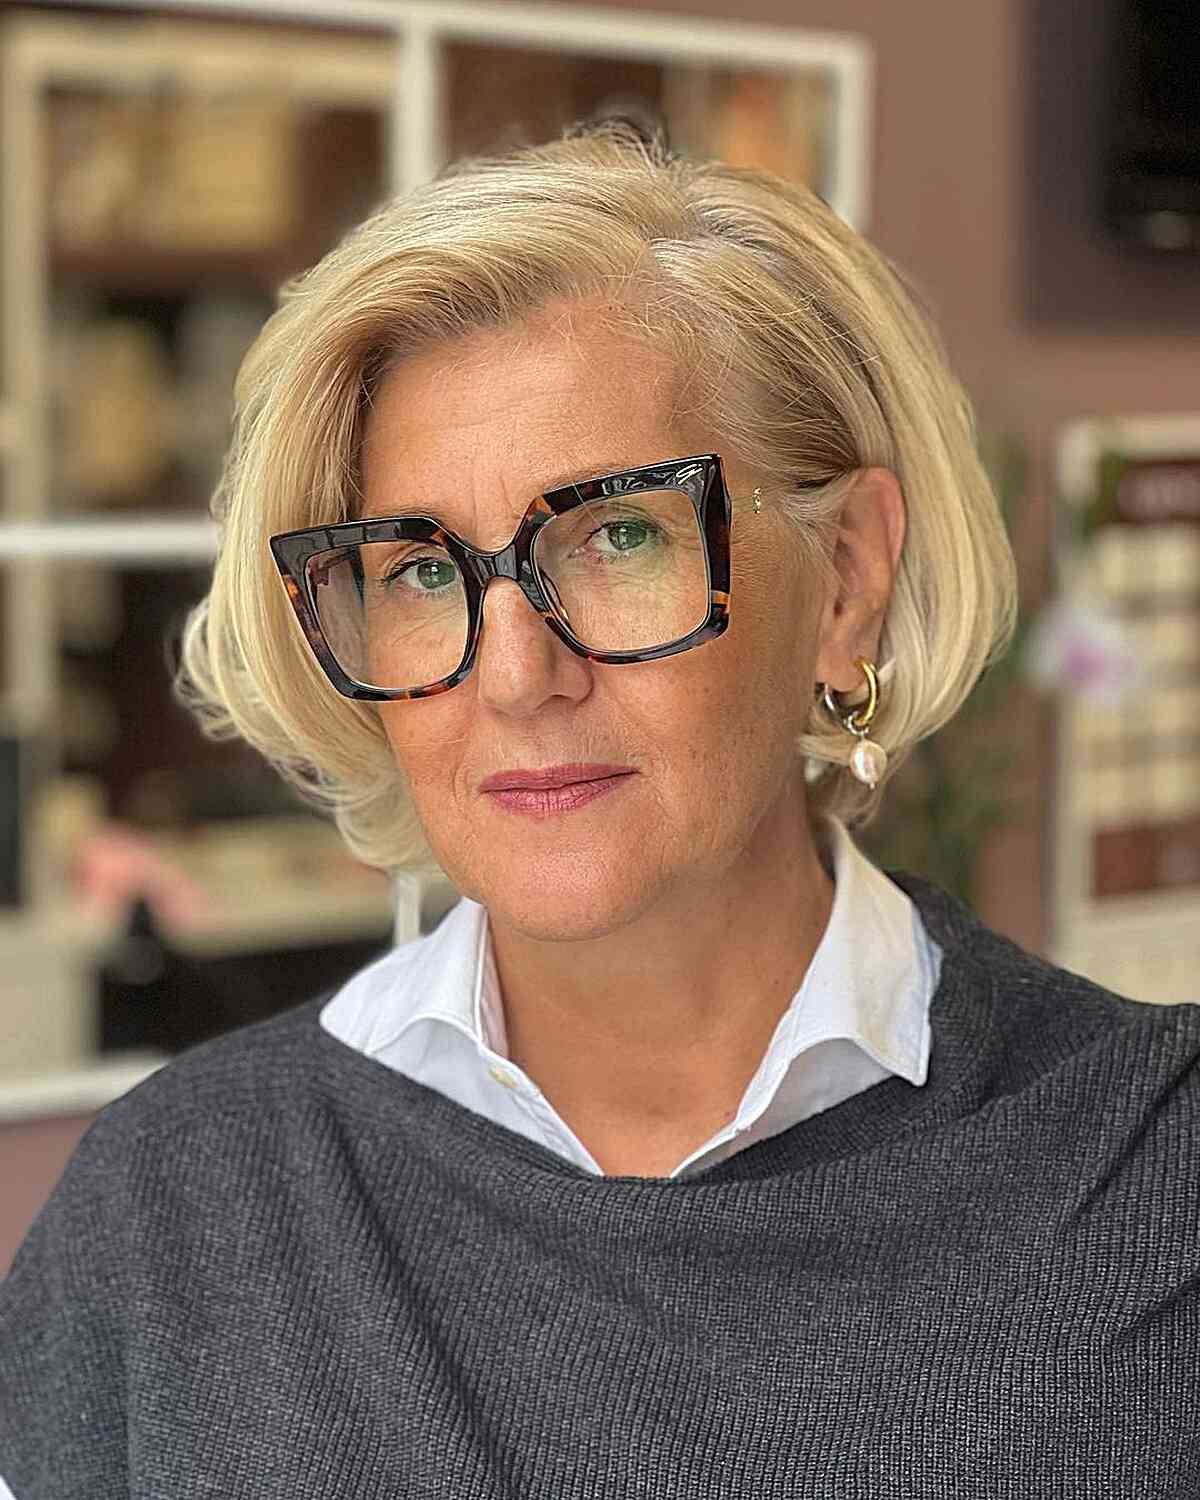 Short Side-Swept Layered Bob for Women Over 60 with Coarser Hair and Specs